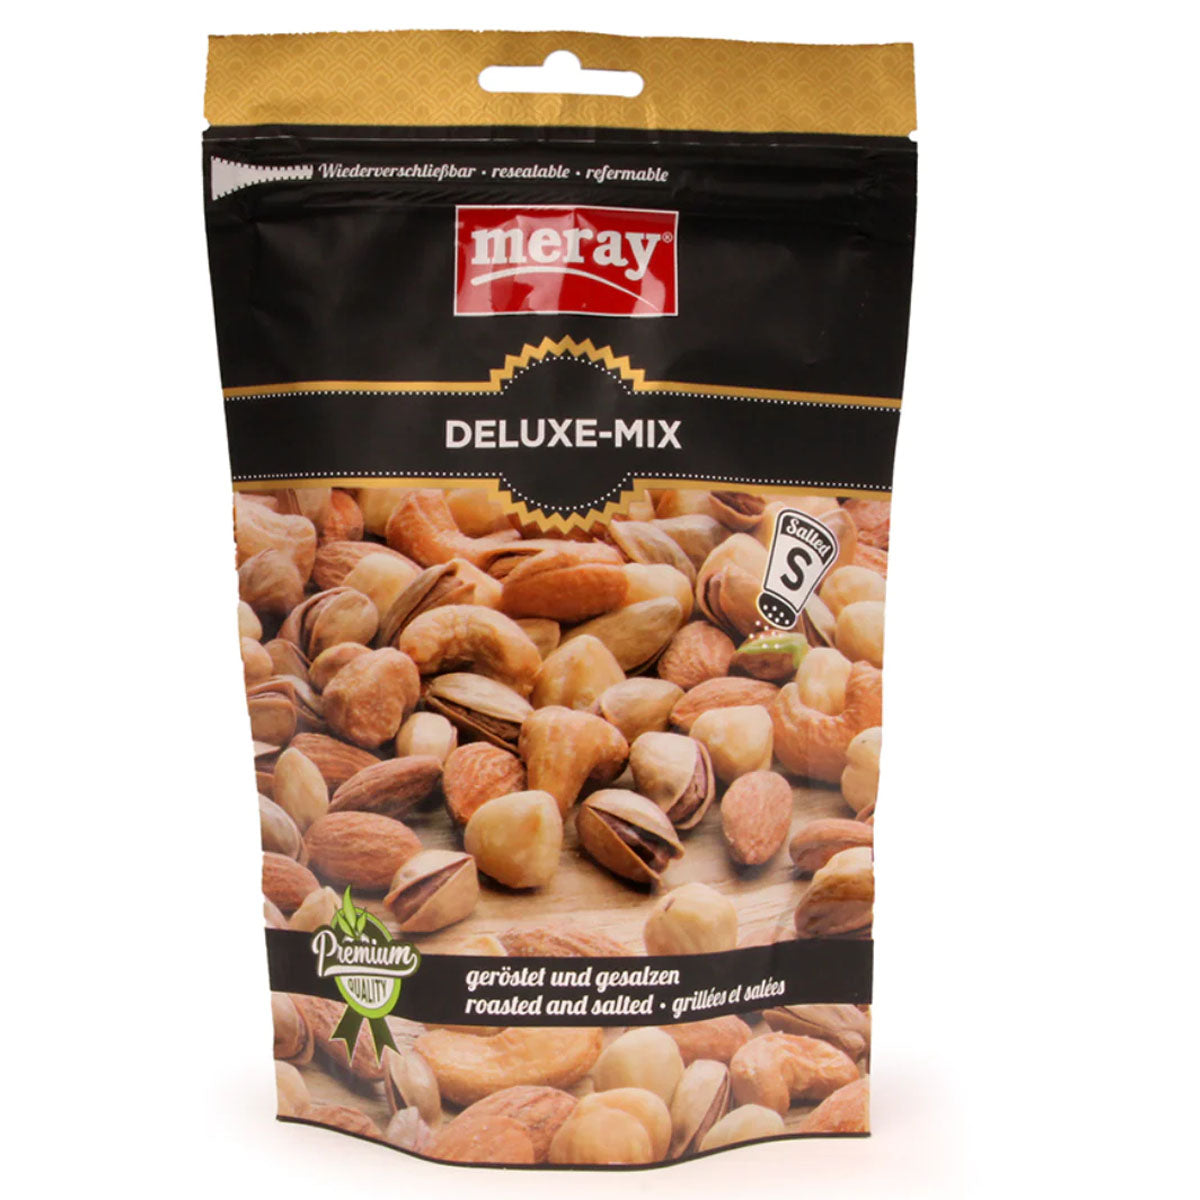 A bag of Meray - Roasted Nut Deluxe Mix - 150g on a white background.